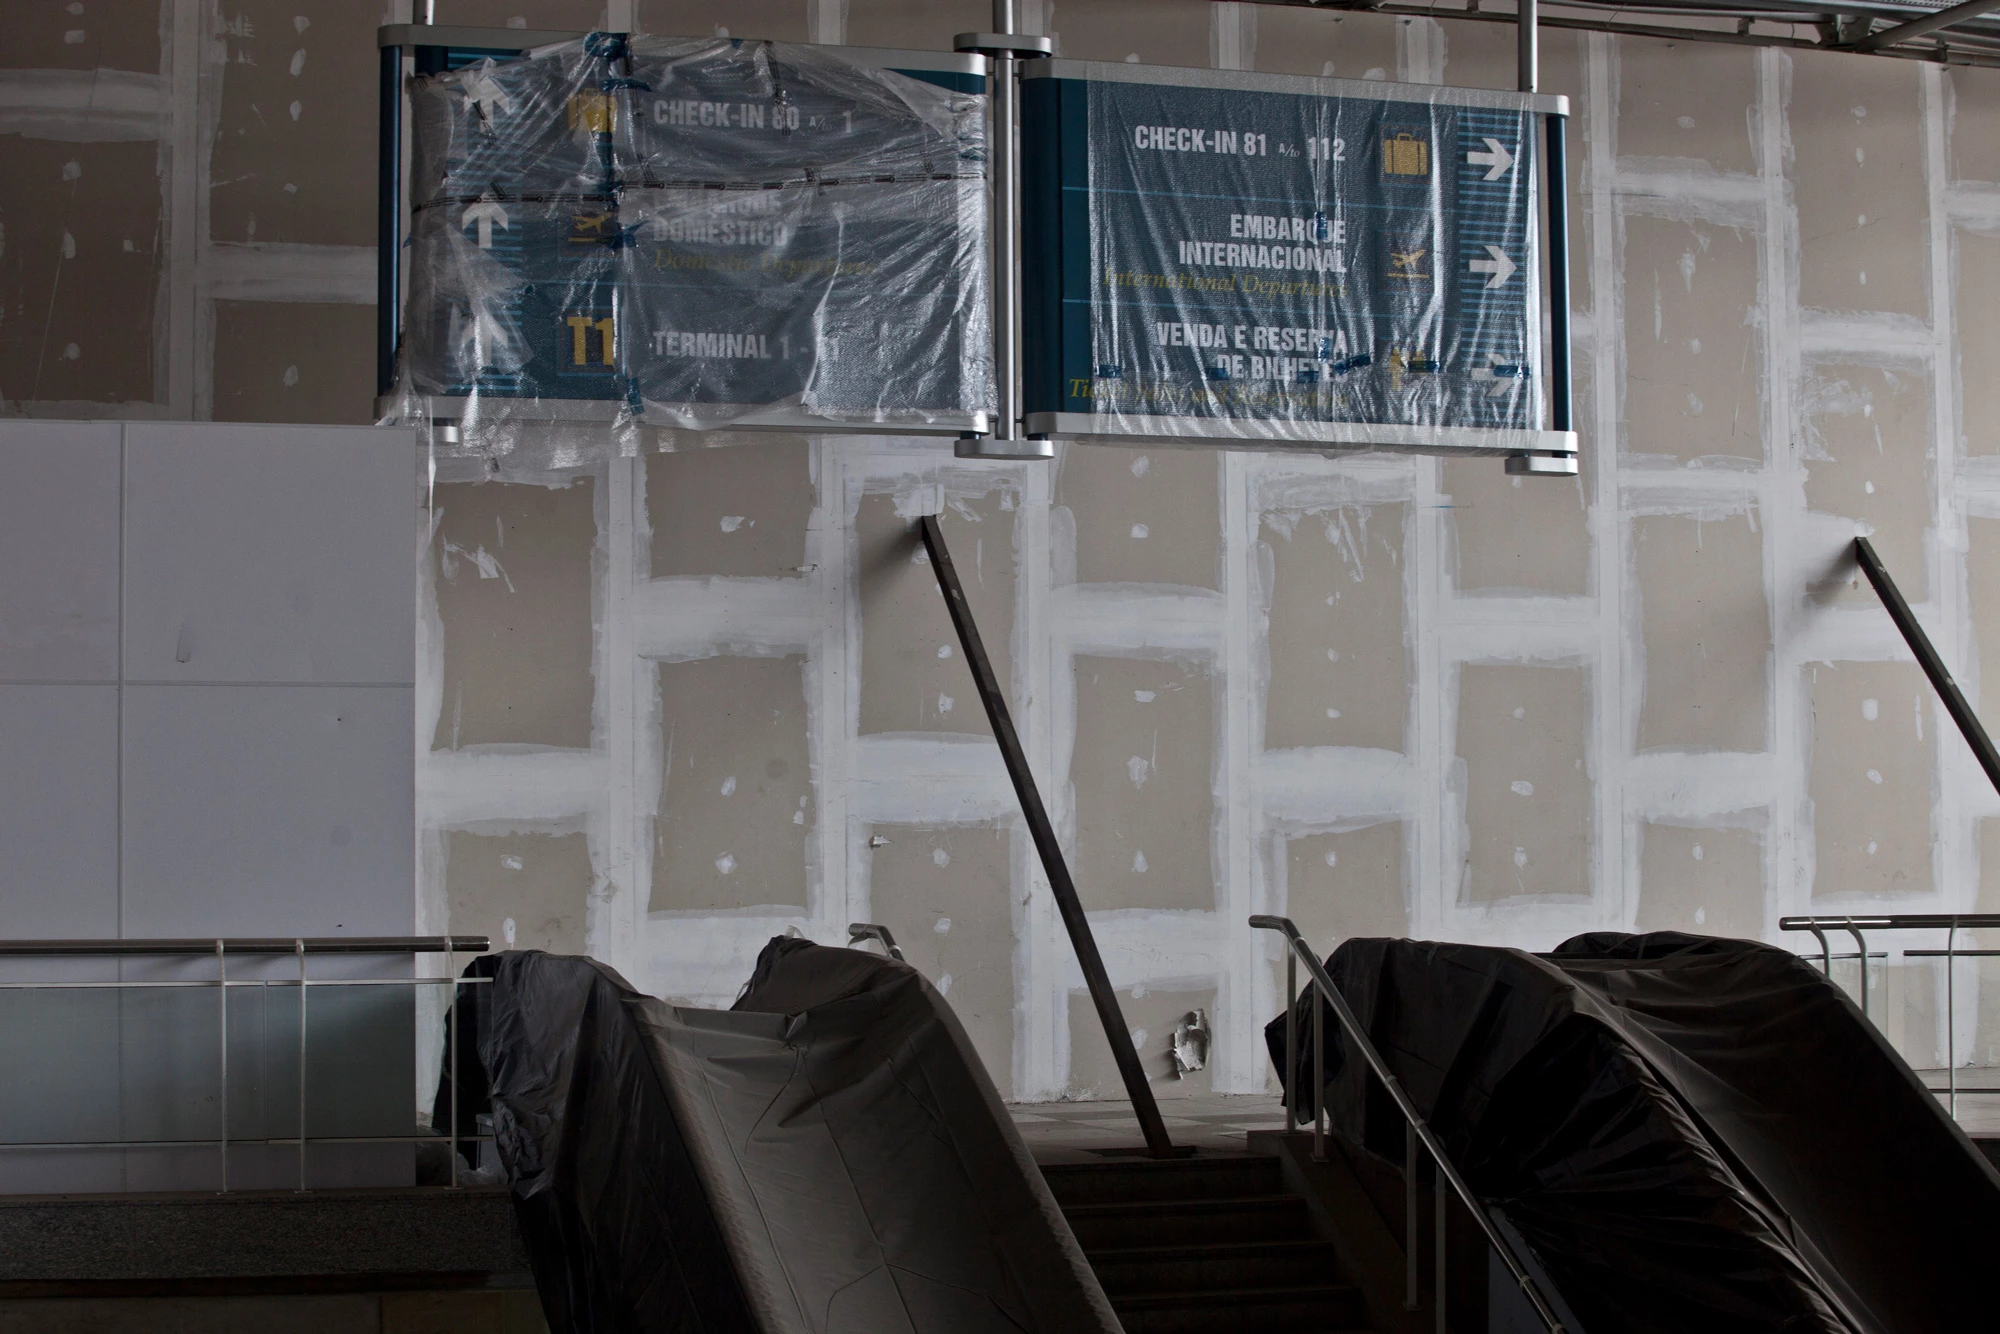 Escalators and signs sit under plastic during construction at the Galeao International Airport in Rio de Janeiro, Brazil, on Tuesday, Sept. 3, 2013. Operated by Infraero Aeroportos, Galeao is Brazil's largest airport. Photographer: Dado Galdieri/Bloomberg via Getty Images